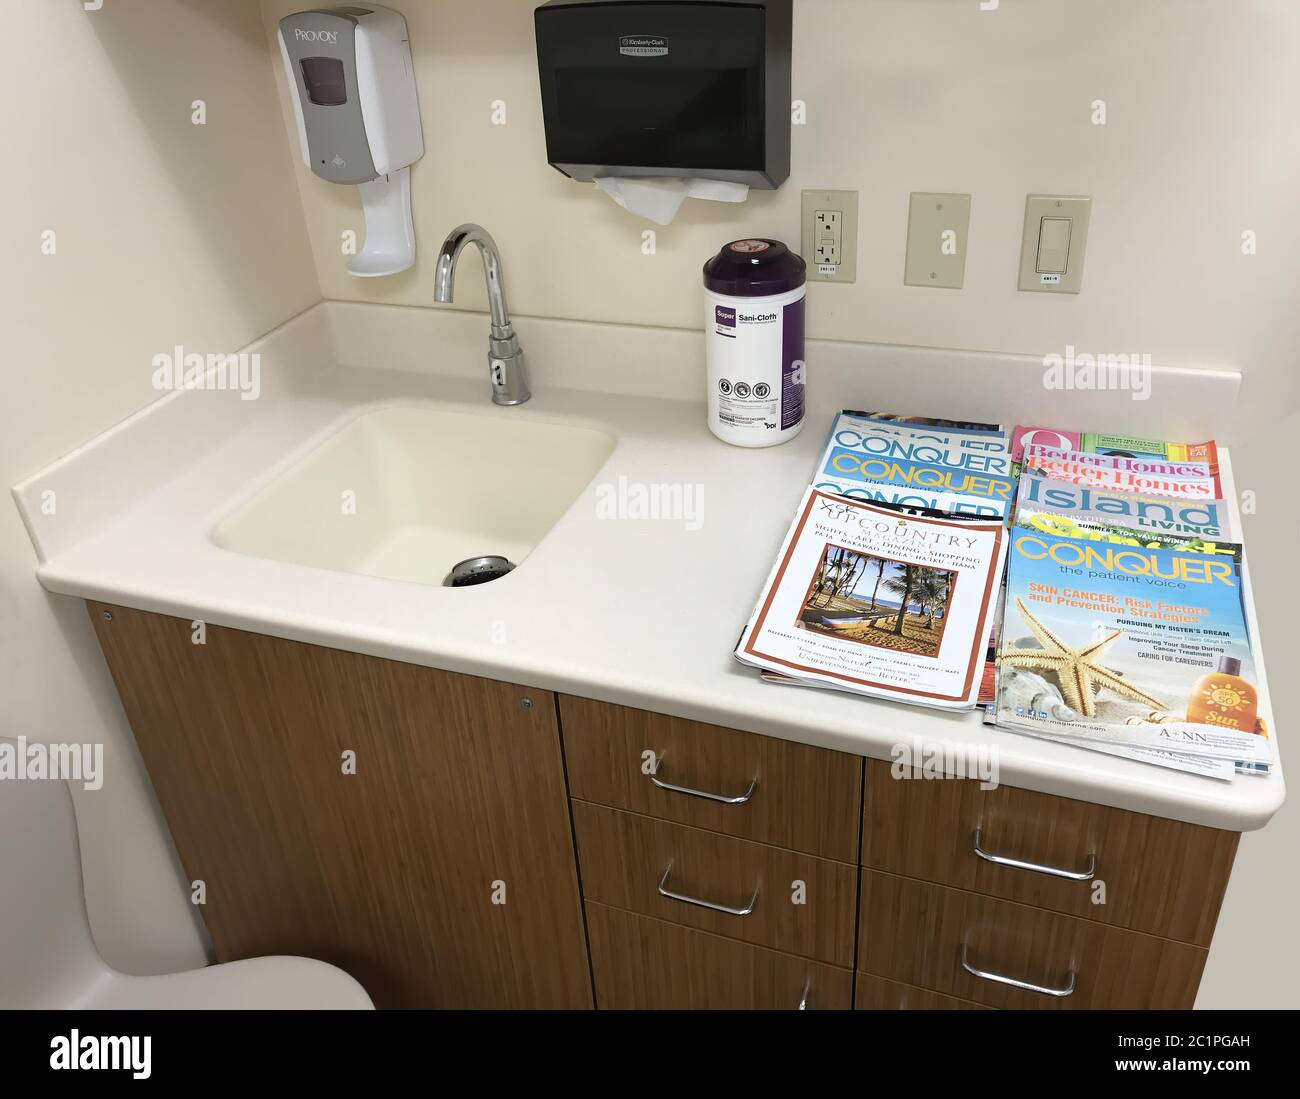 Typical clean up sink found in a medical clinic setting.  For editorial use only. Stock Photo